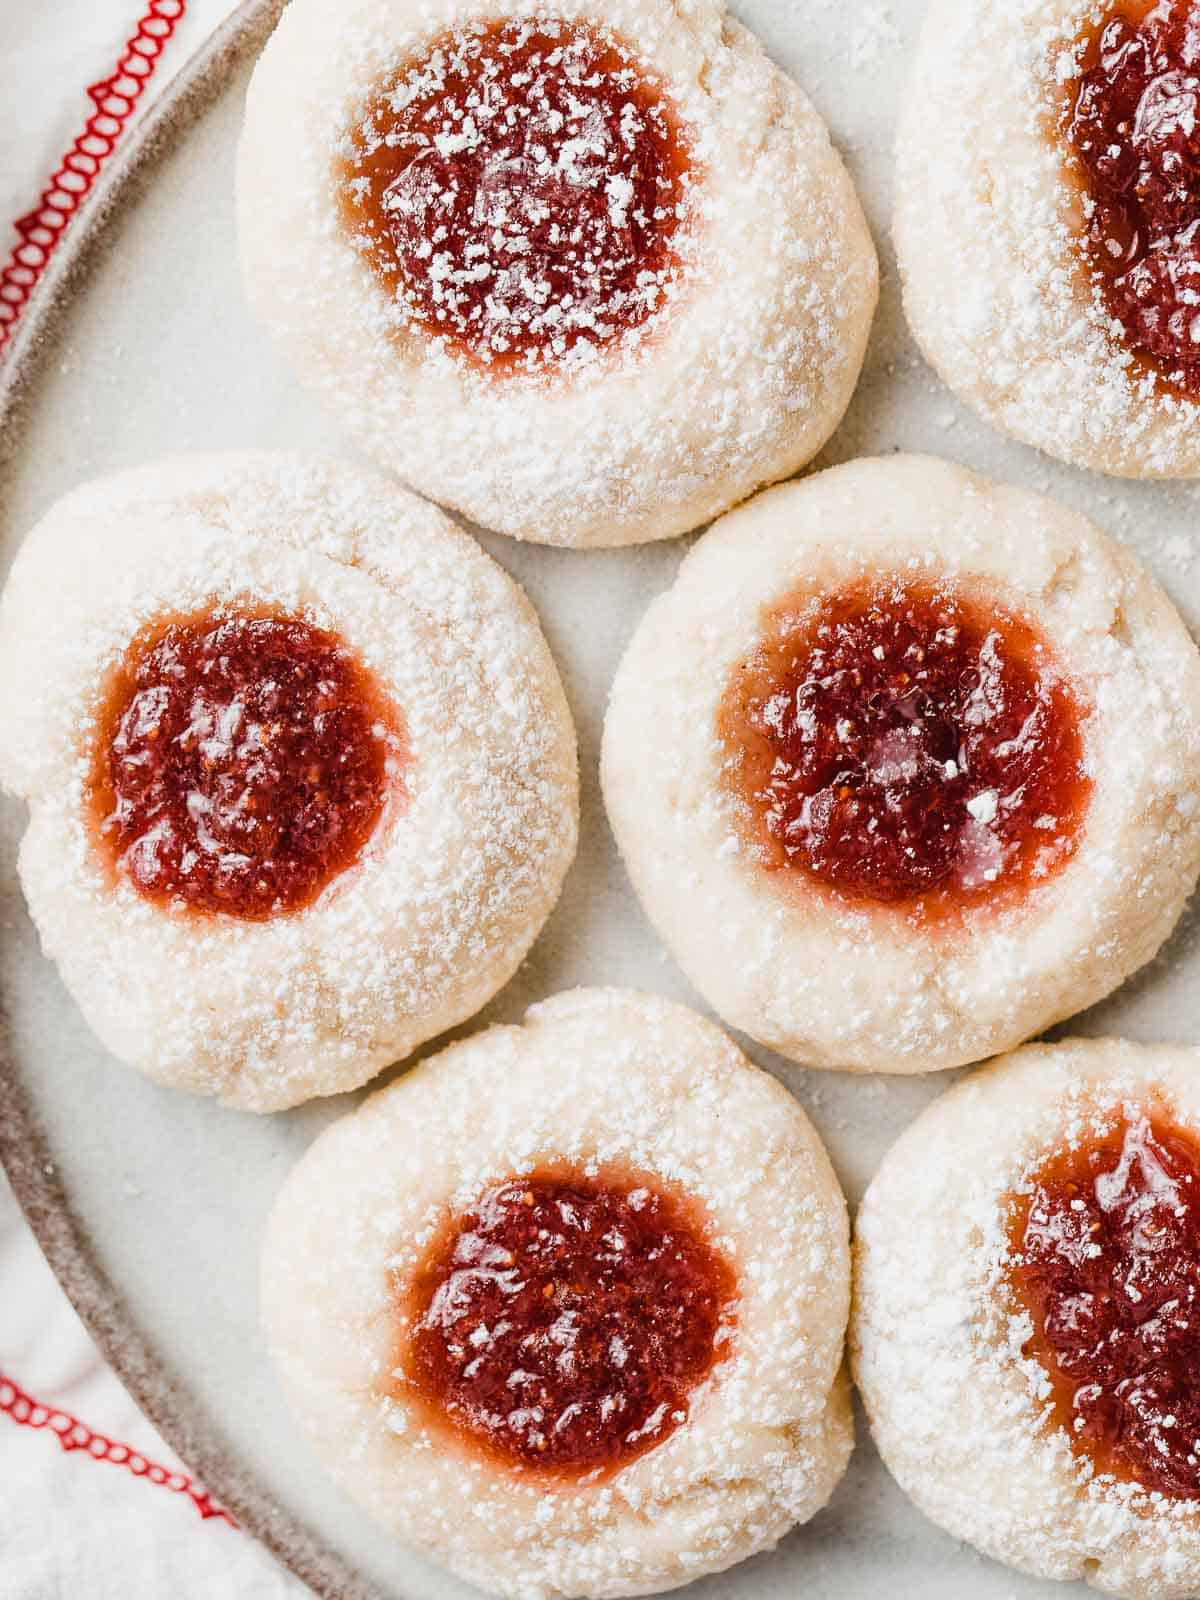 Baked sourdough thumbprint cookies on a plate.